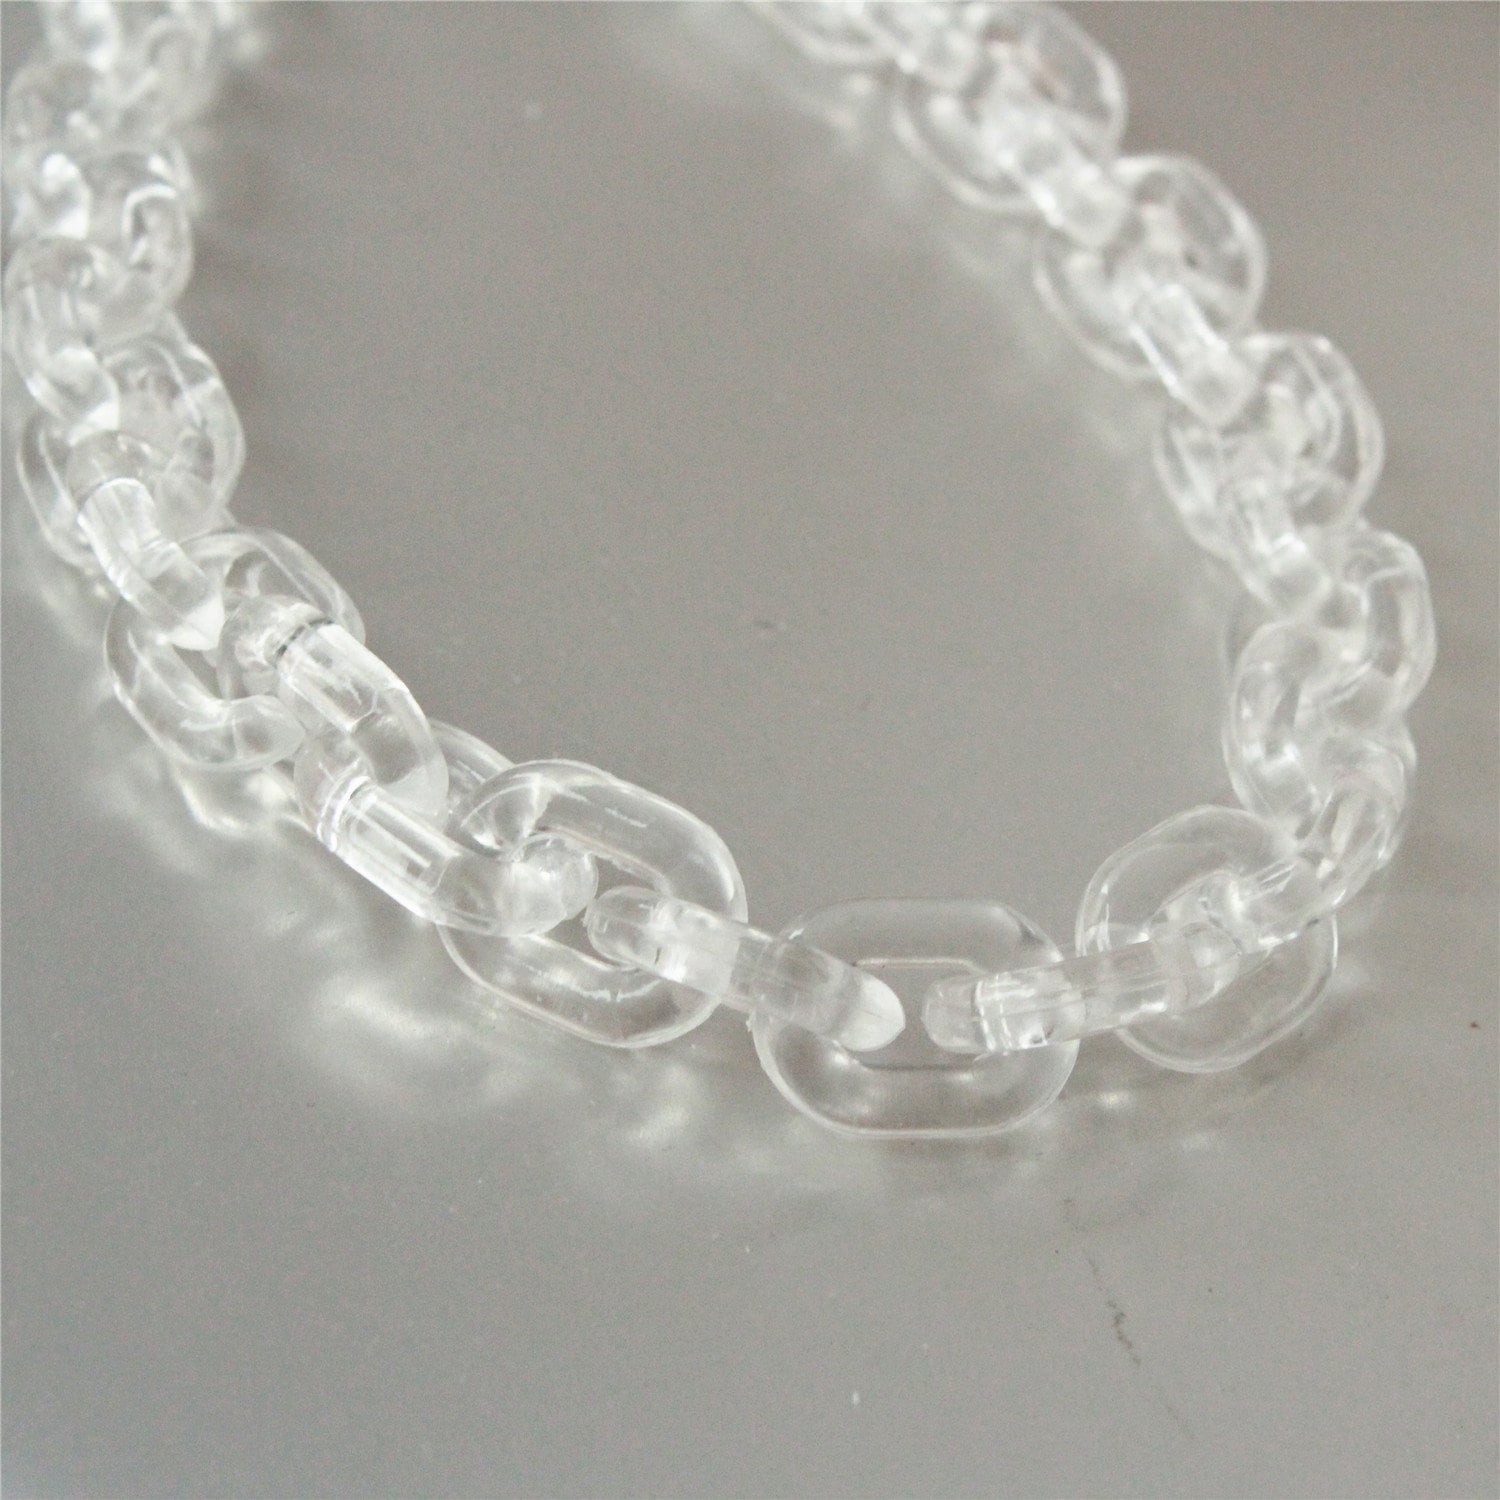 60pcs Clear White Oval Acrylic Chain Links, Transparent Plastic Chain  Links, Necklace Chain Links, Open Link ,Size 20mmx15mm